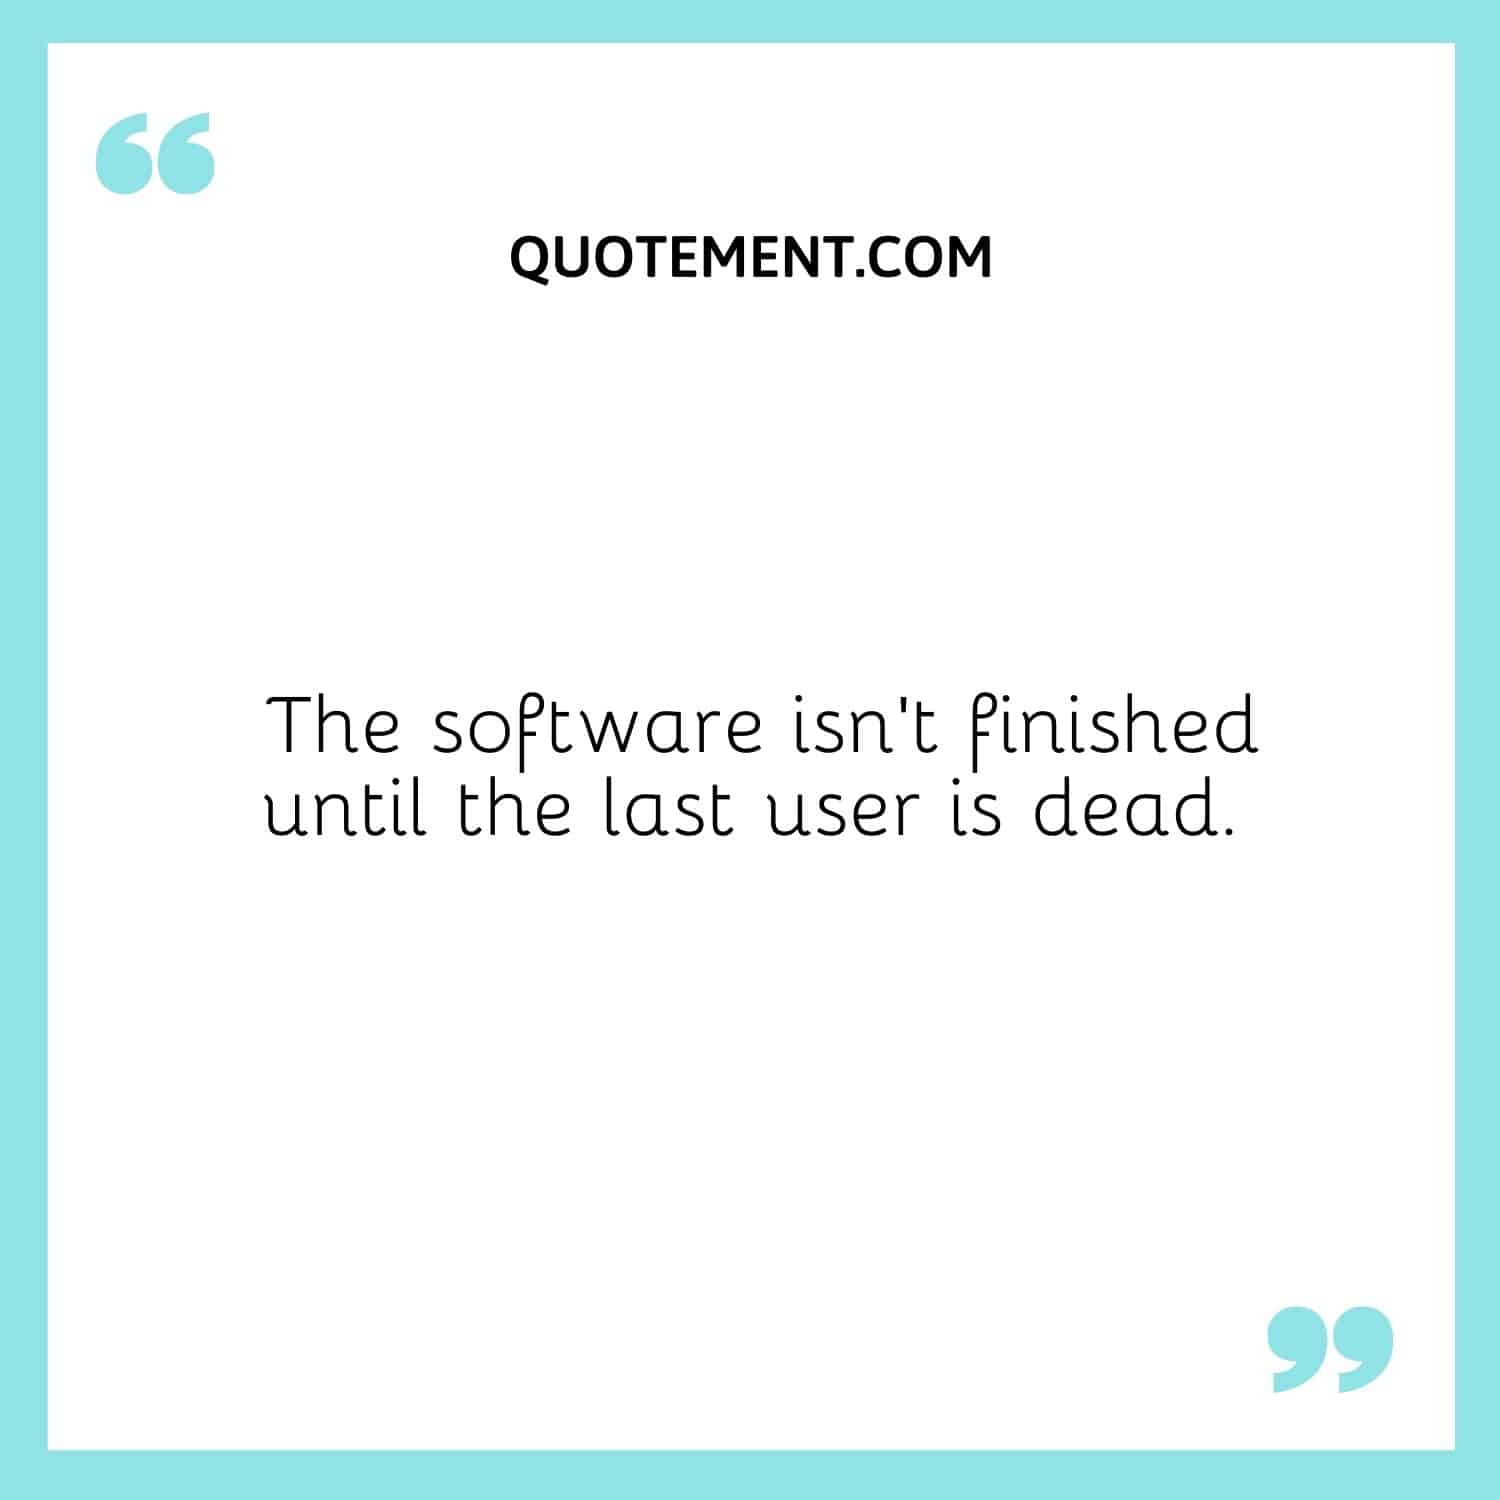 The software isn’t finished until the last user is dead.